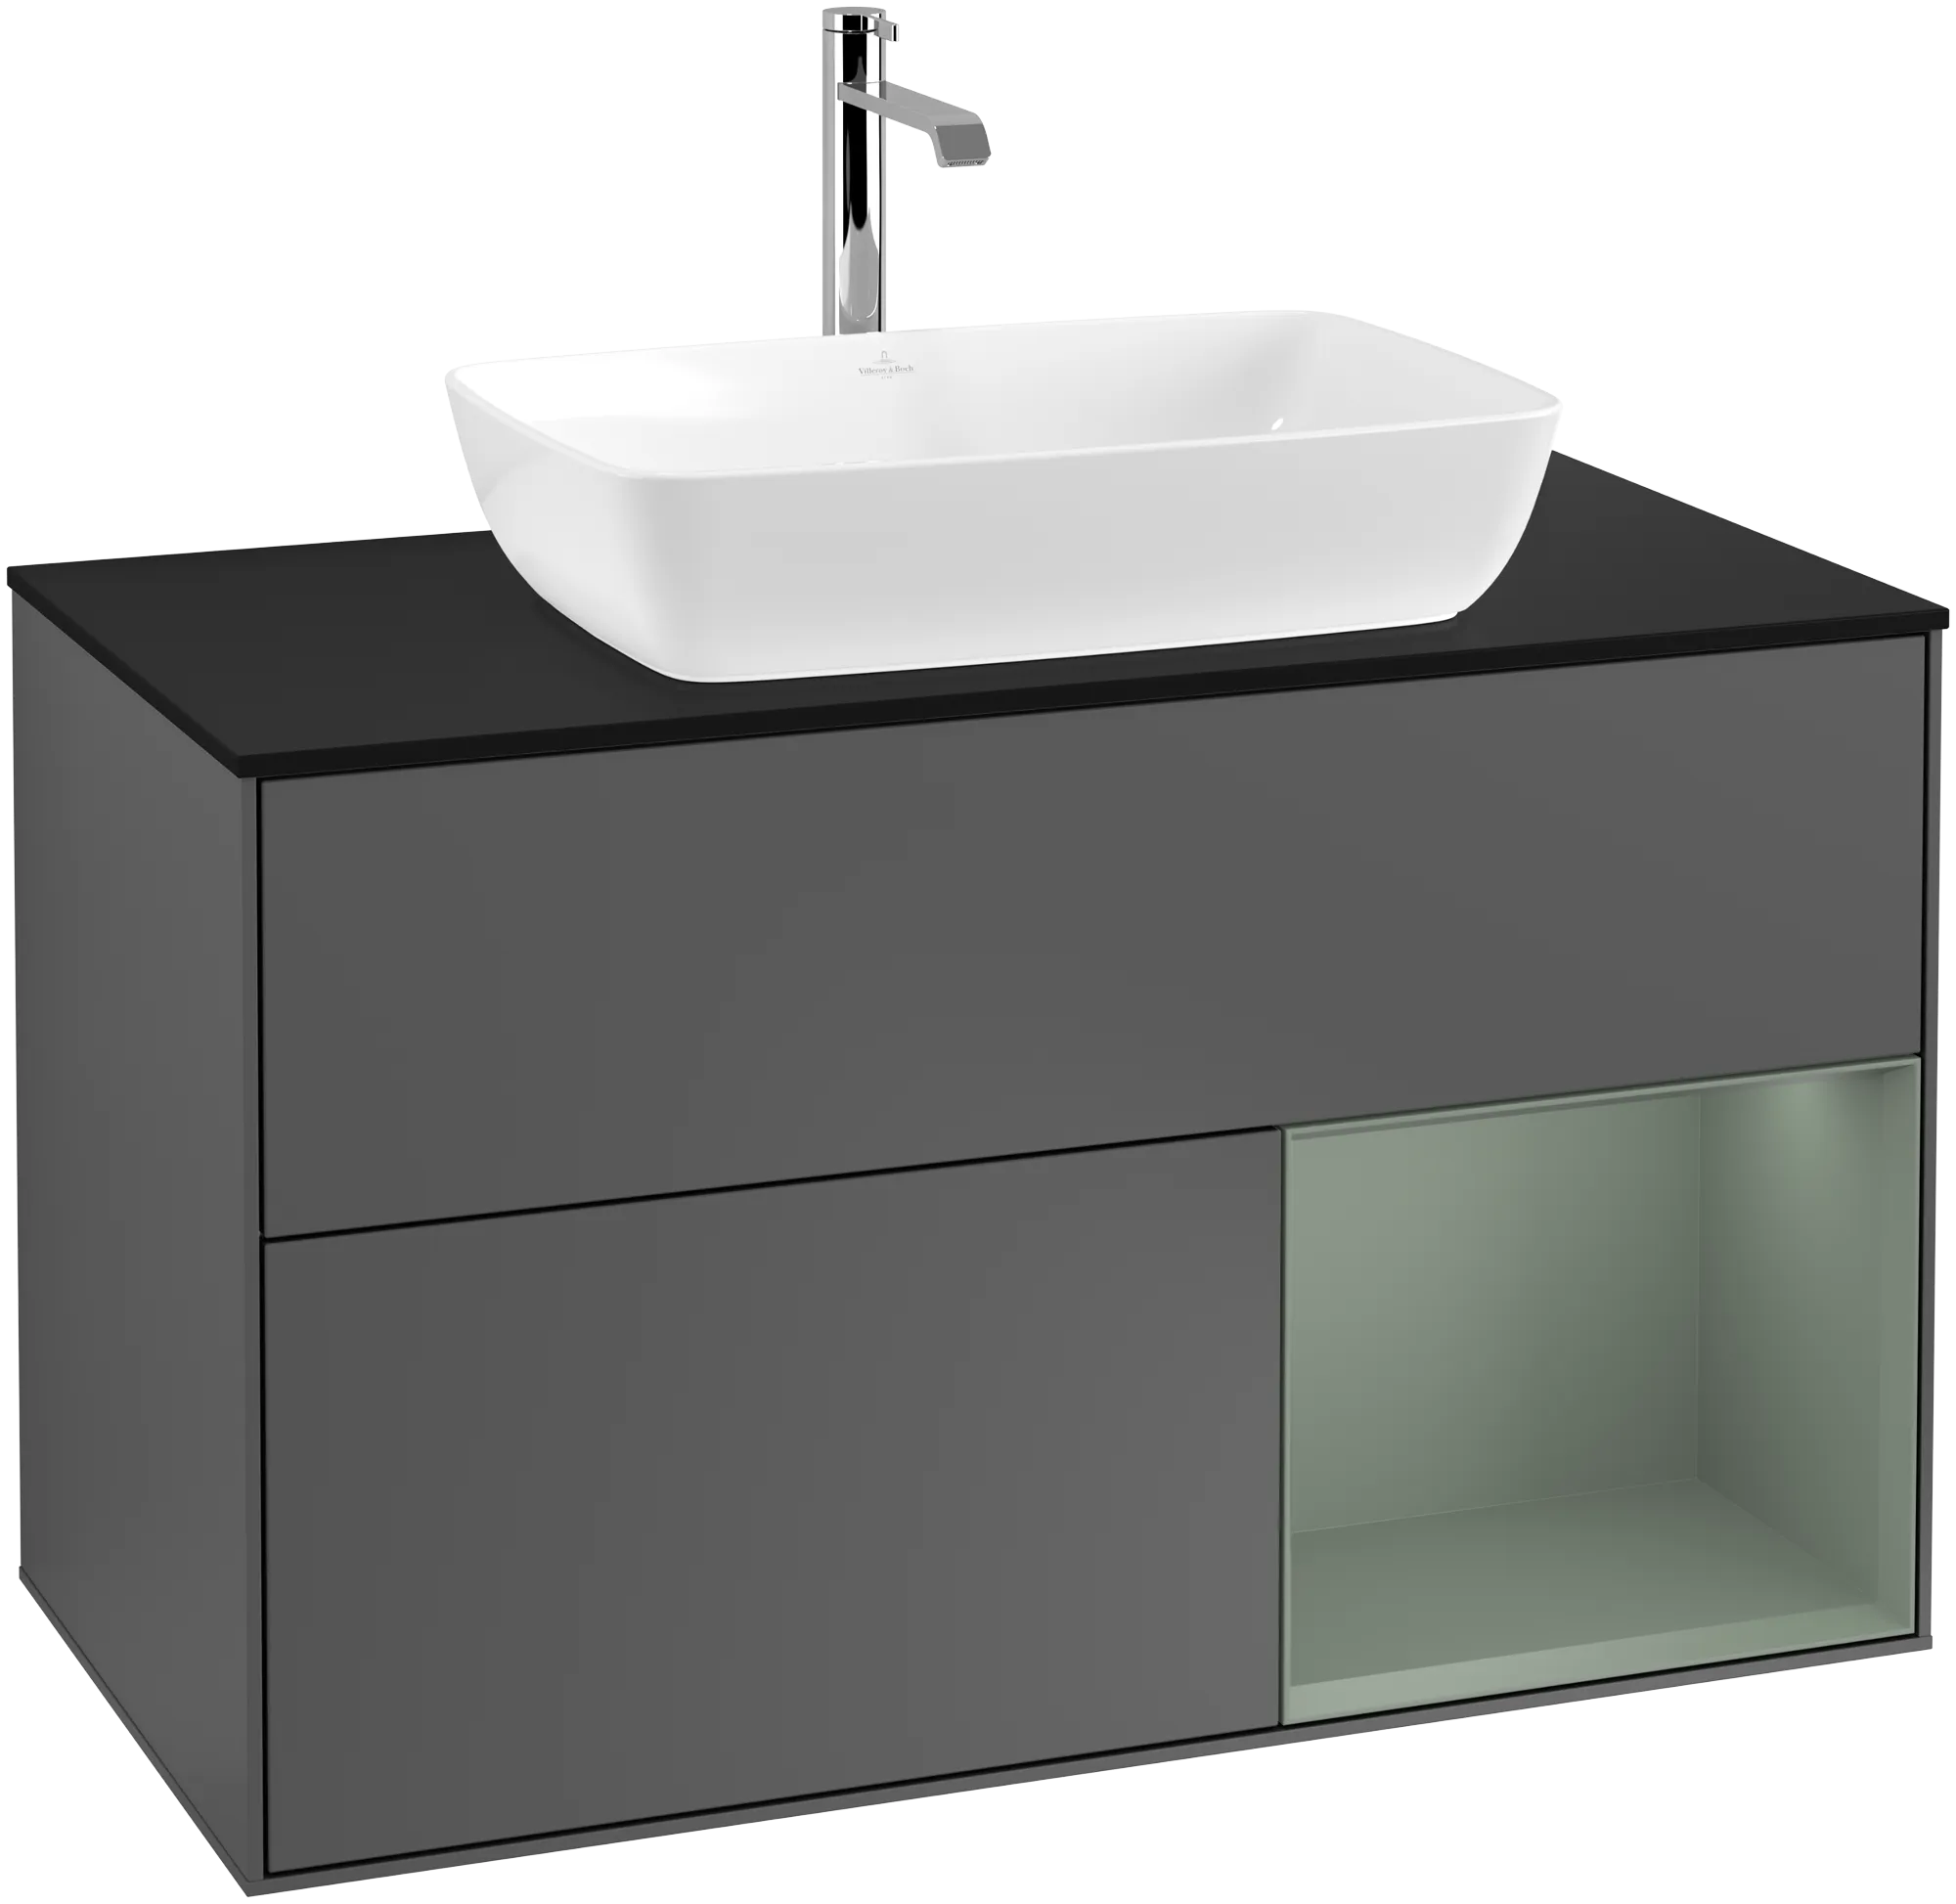 Picture of VILLEROY BOCH Finion Vanity unit, with lighting, 2 pull-out compartments, 1000 x 603 x 501 mm, Anthracite Matt Lacquer / Olive Matt Lacquer / Glass Black Matt #G782GMGK